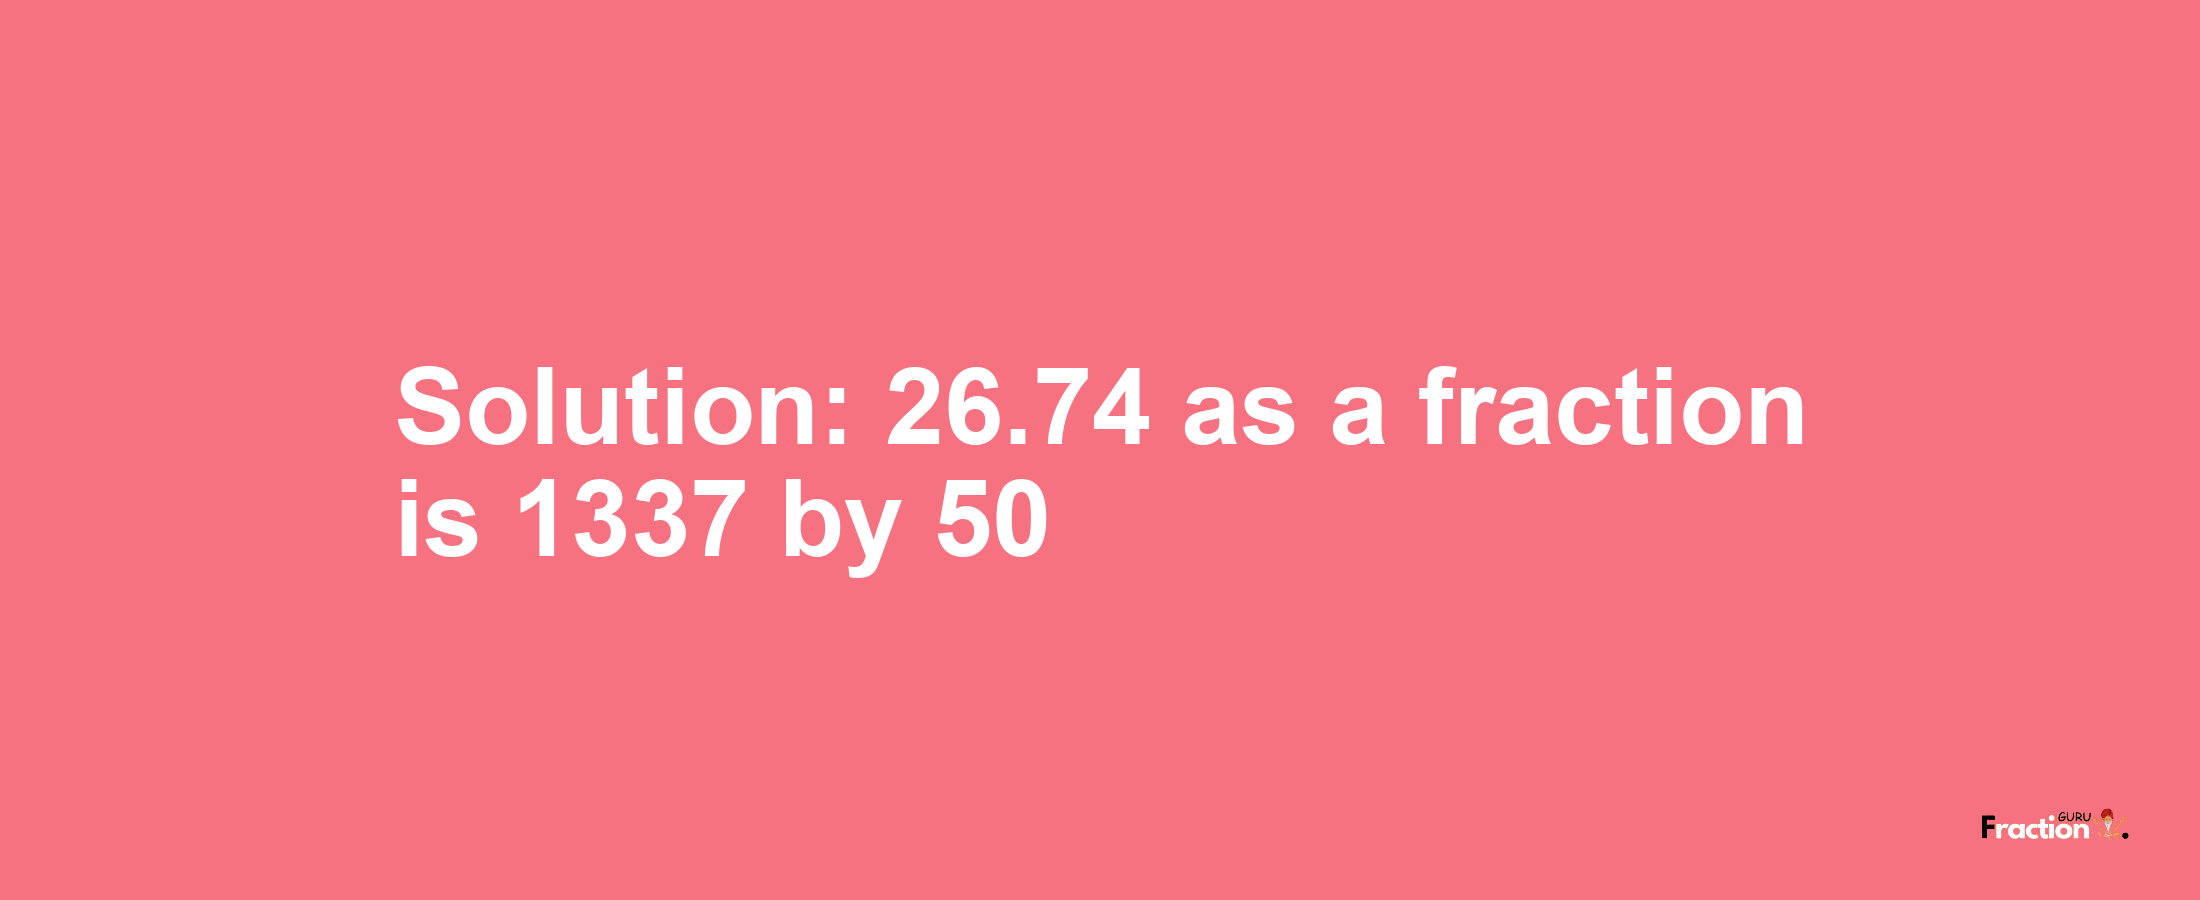 Solution:26.74 as a fraction is 1337/50